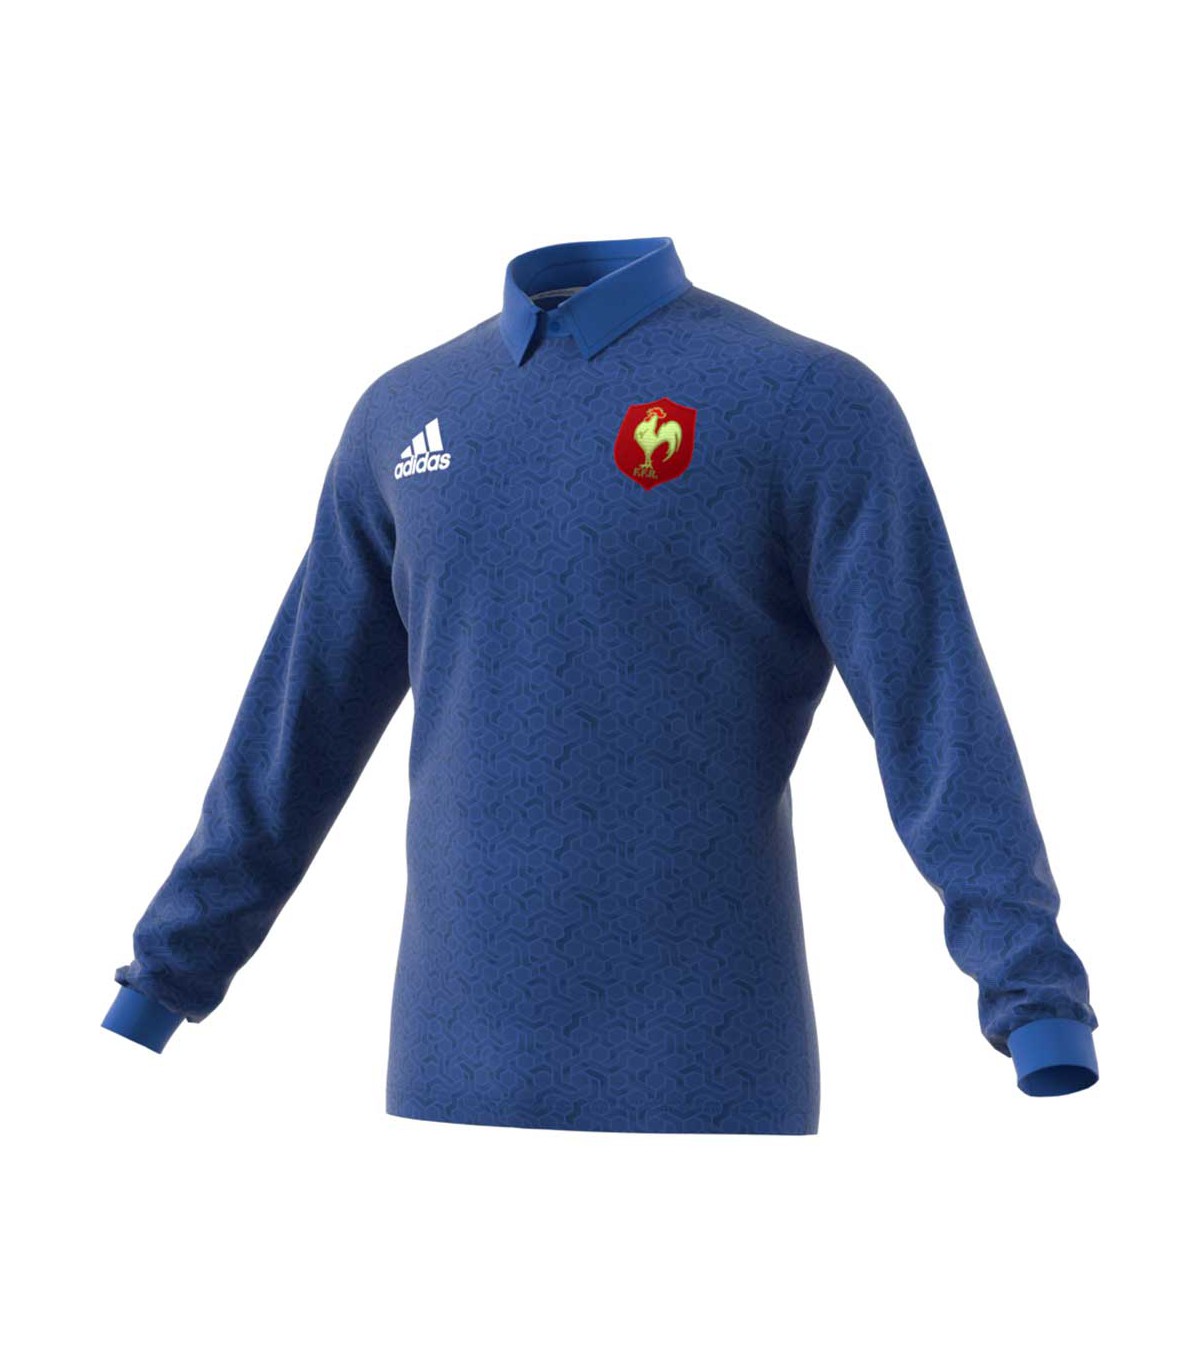 POLO RUGBY XV DE FRANCE 2017/2018 ADULTE - ADIDAS chez Rugby-Corner